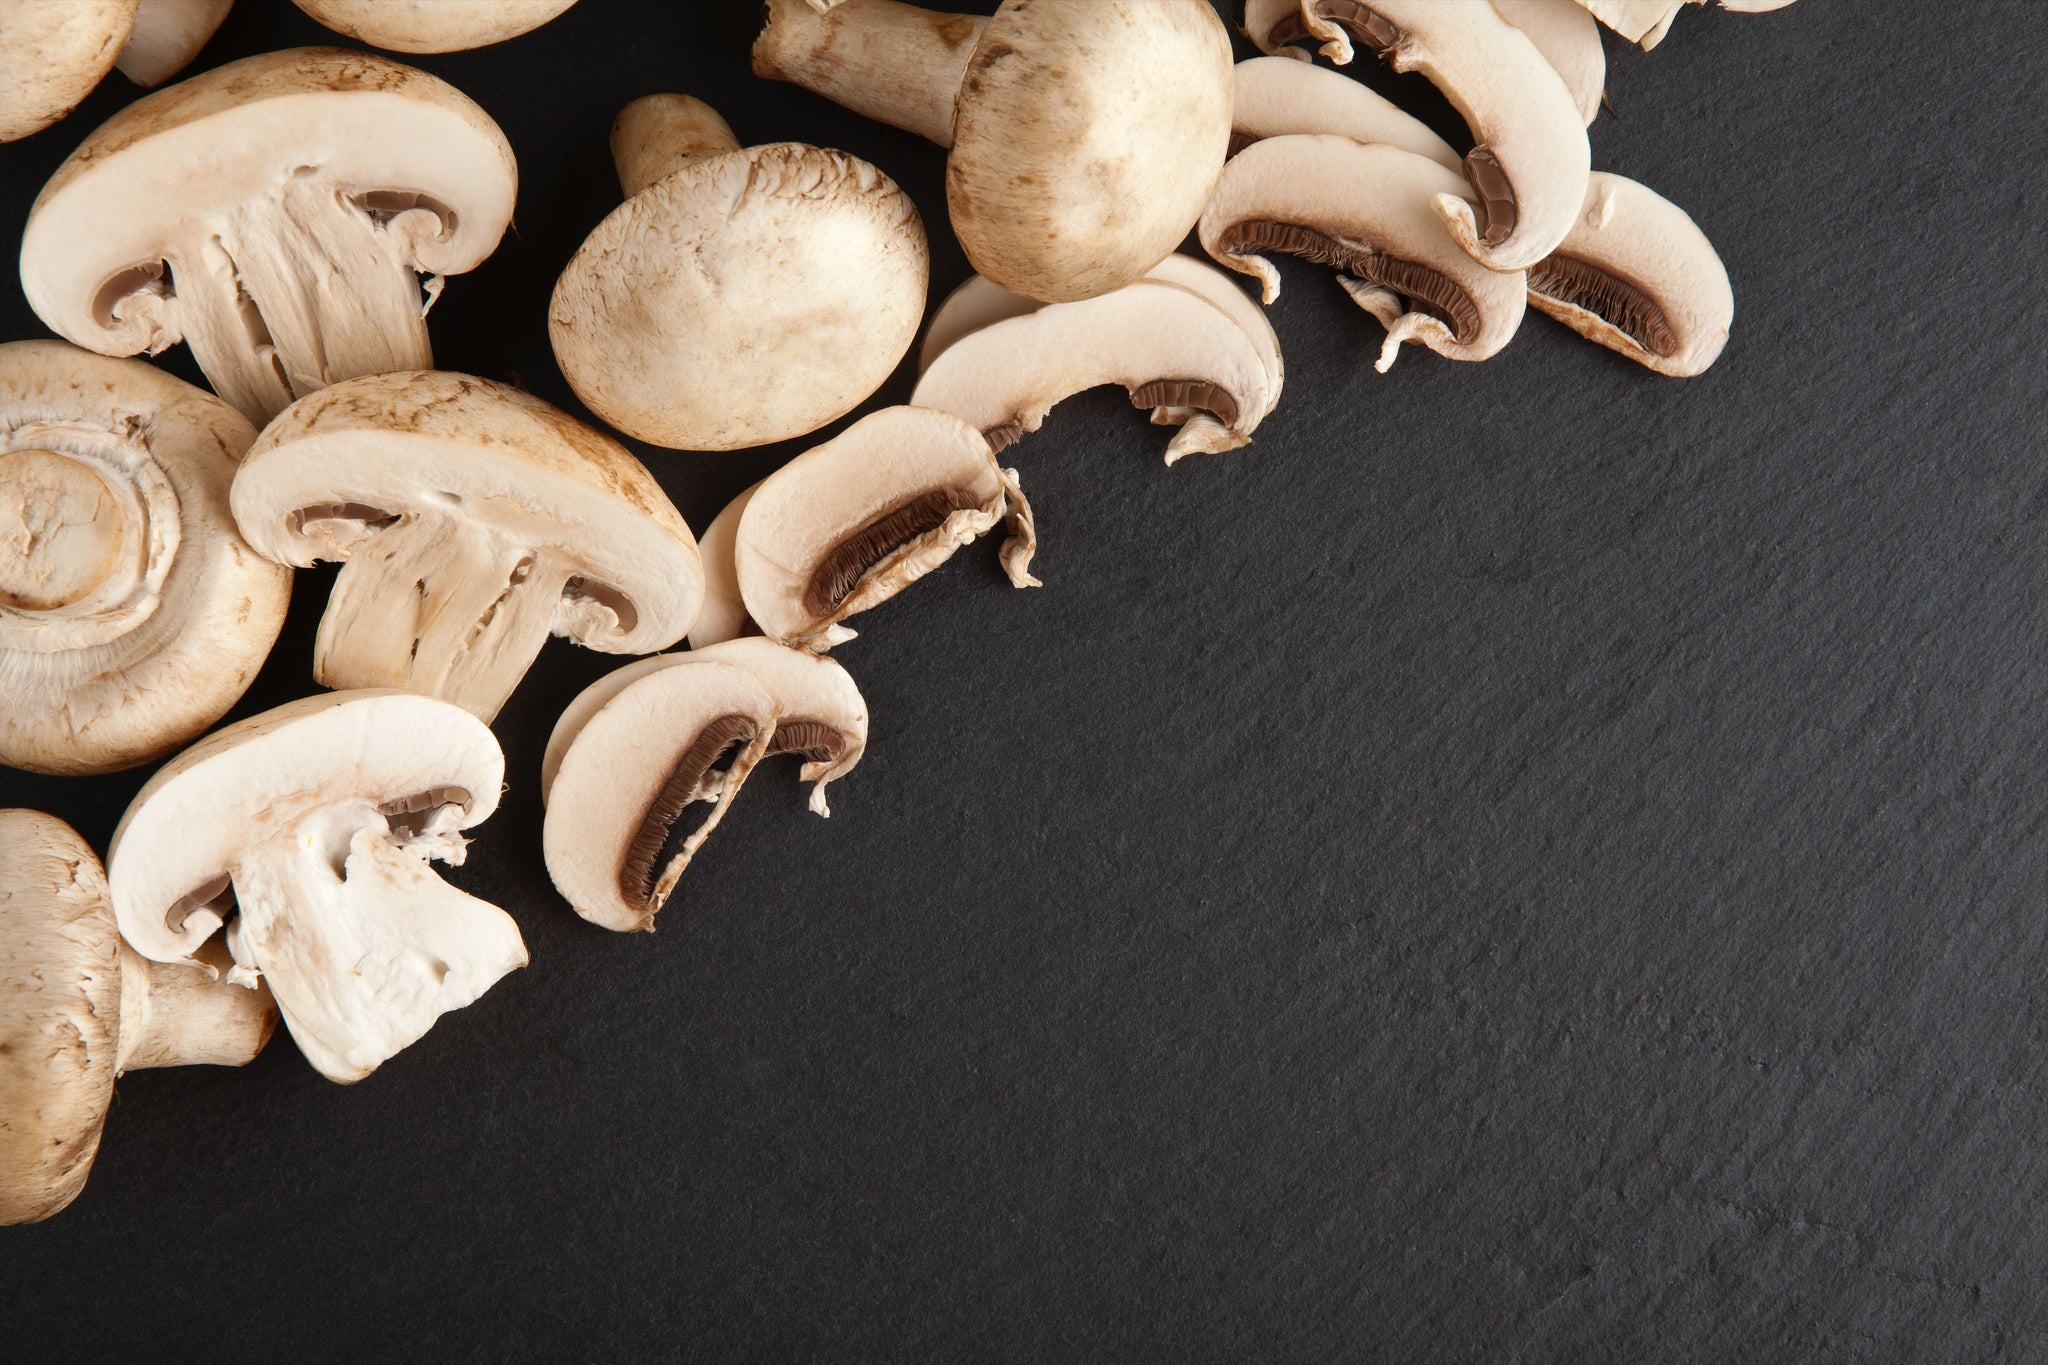 How To Clean Mushrooms: Step-by-Step